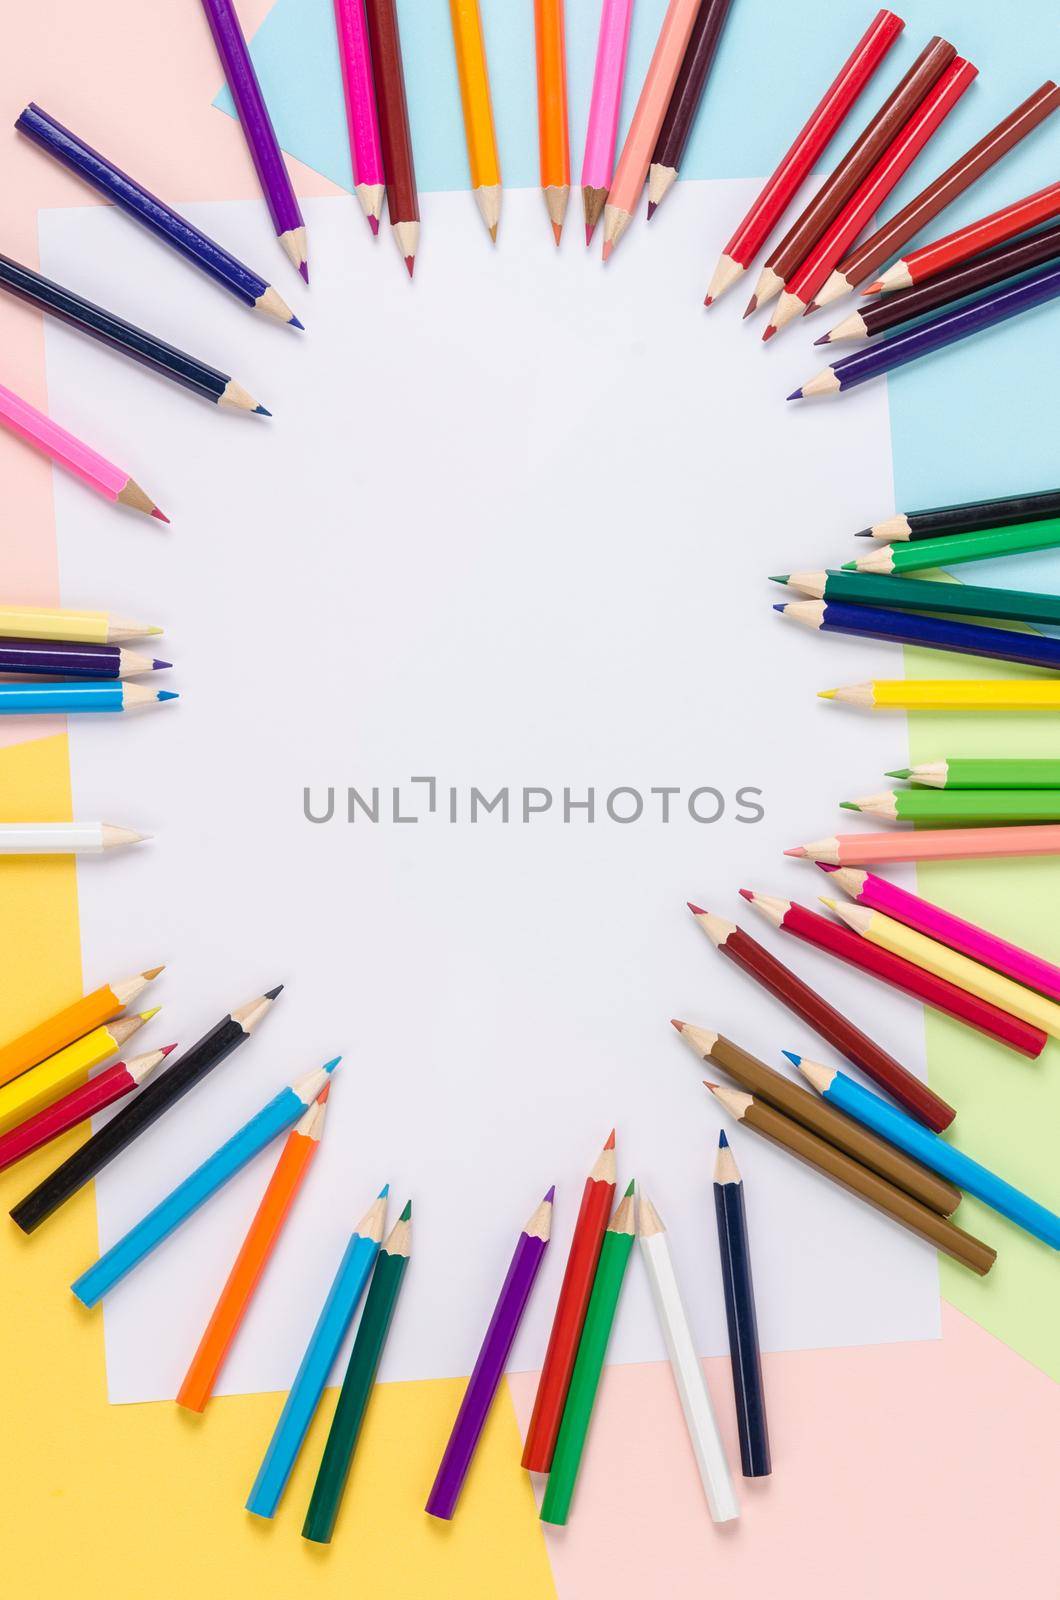 Many colored wooden pencils on paper with copy space for your text or message.